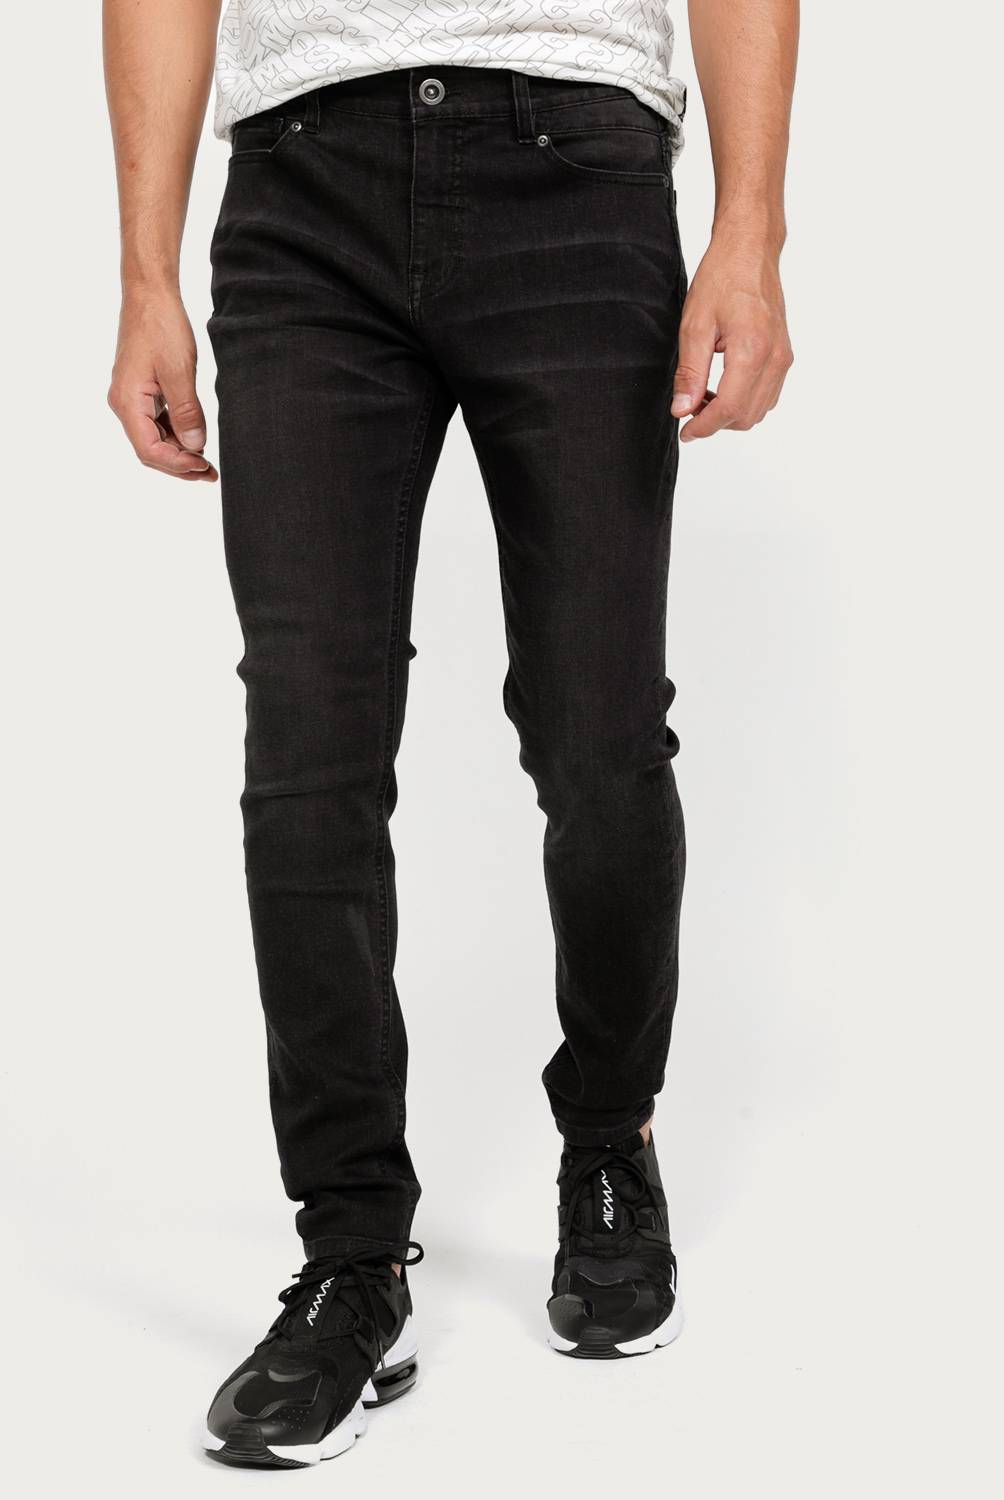 MOSSIMO - Jeans Super Skinny Fit Hombre Mossimo